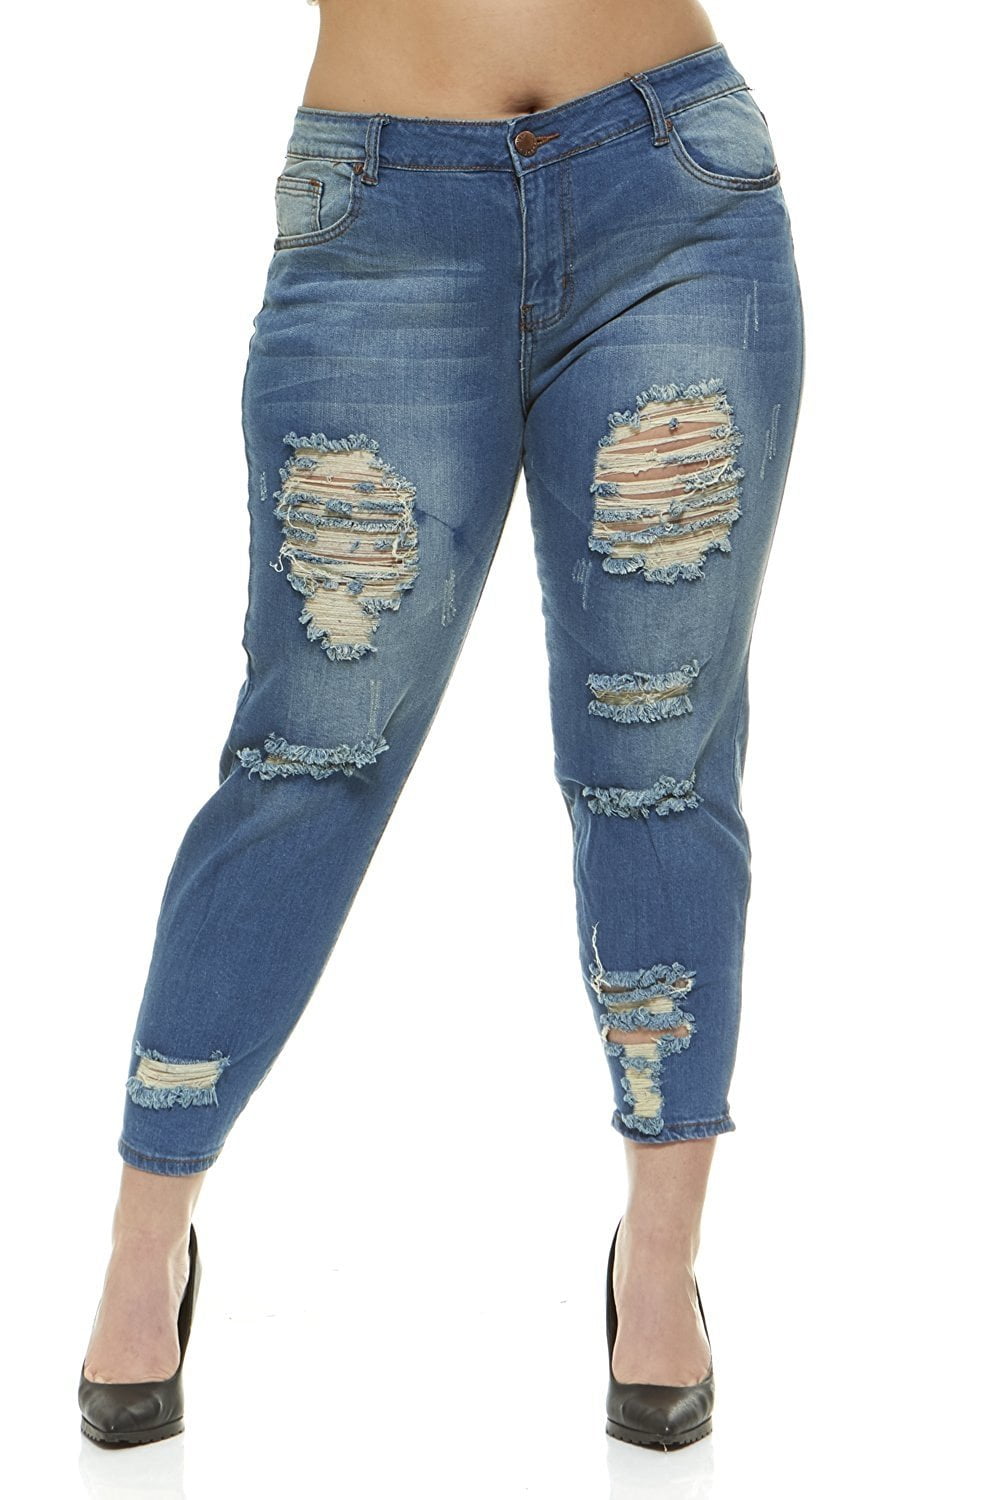 VIP Jeans - Ripped Slits Distressed Ankle Skinny Slim Fit Stretch Jeans ...